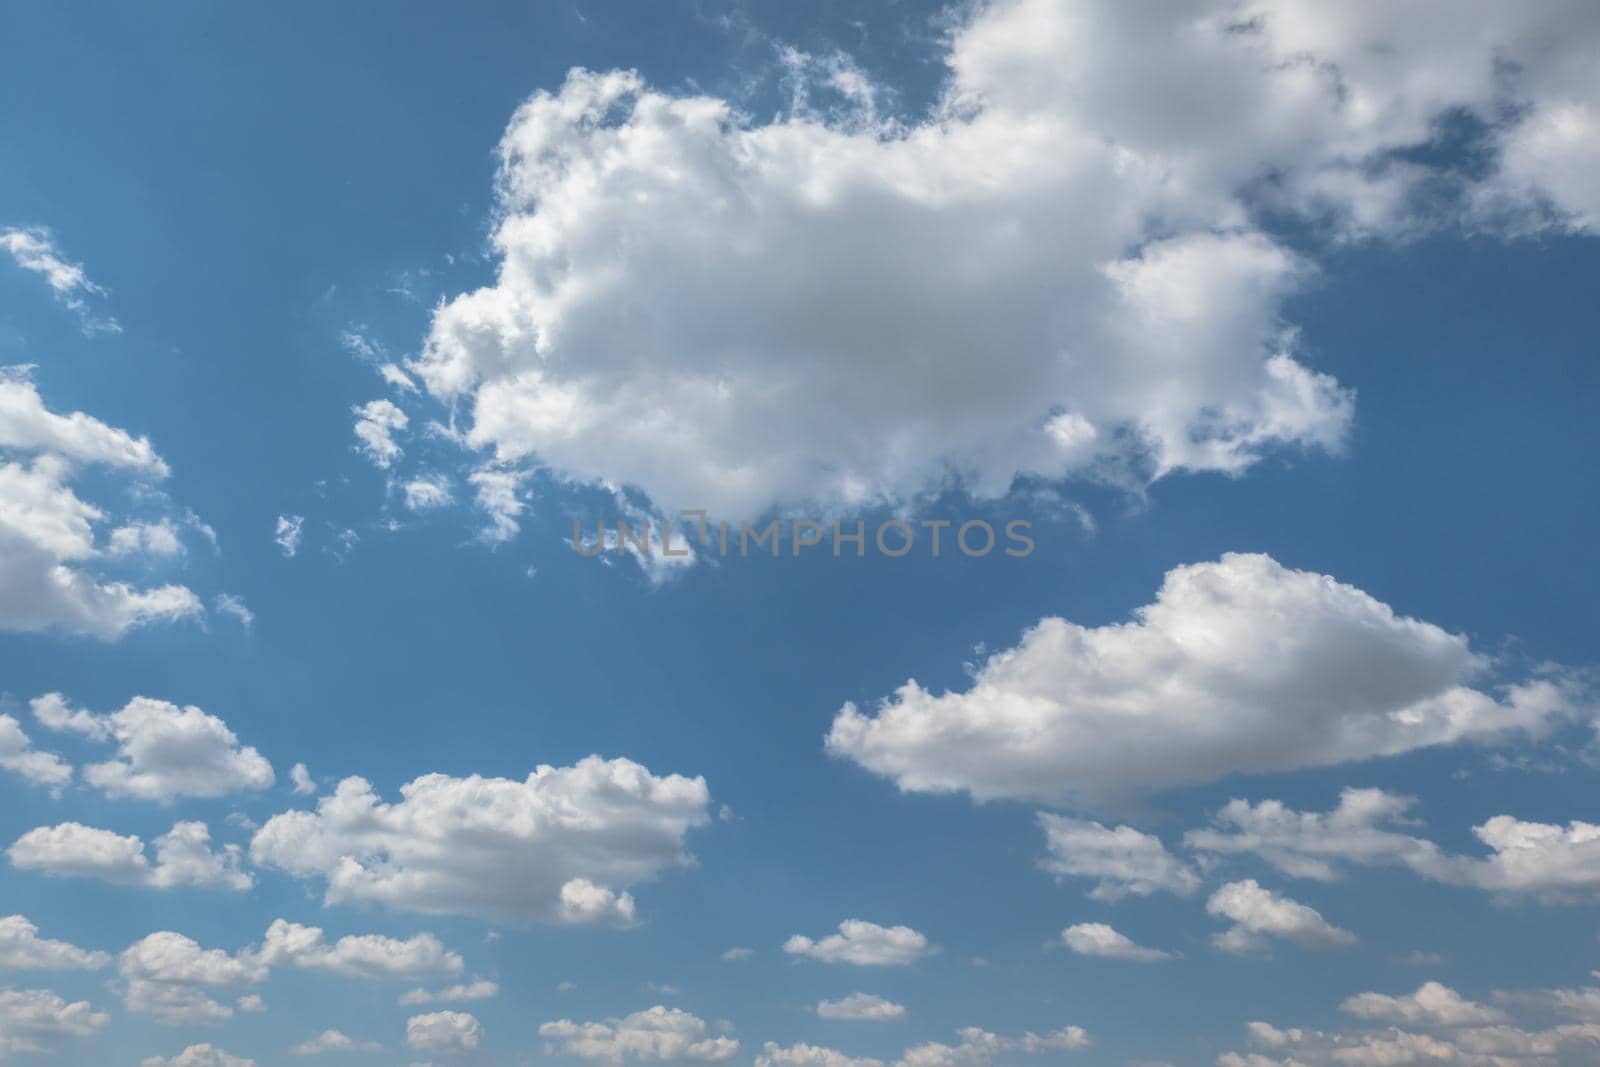 Clouds with blue sky. Ideal for textures and backgrounds.